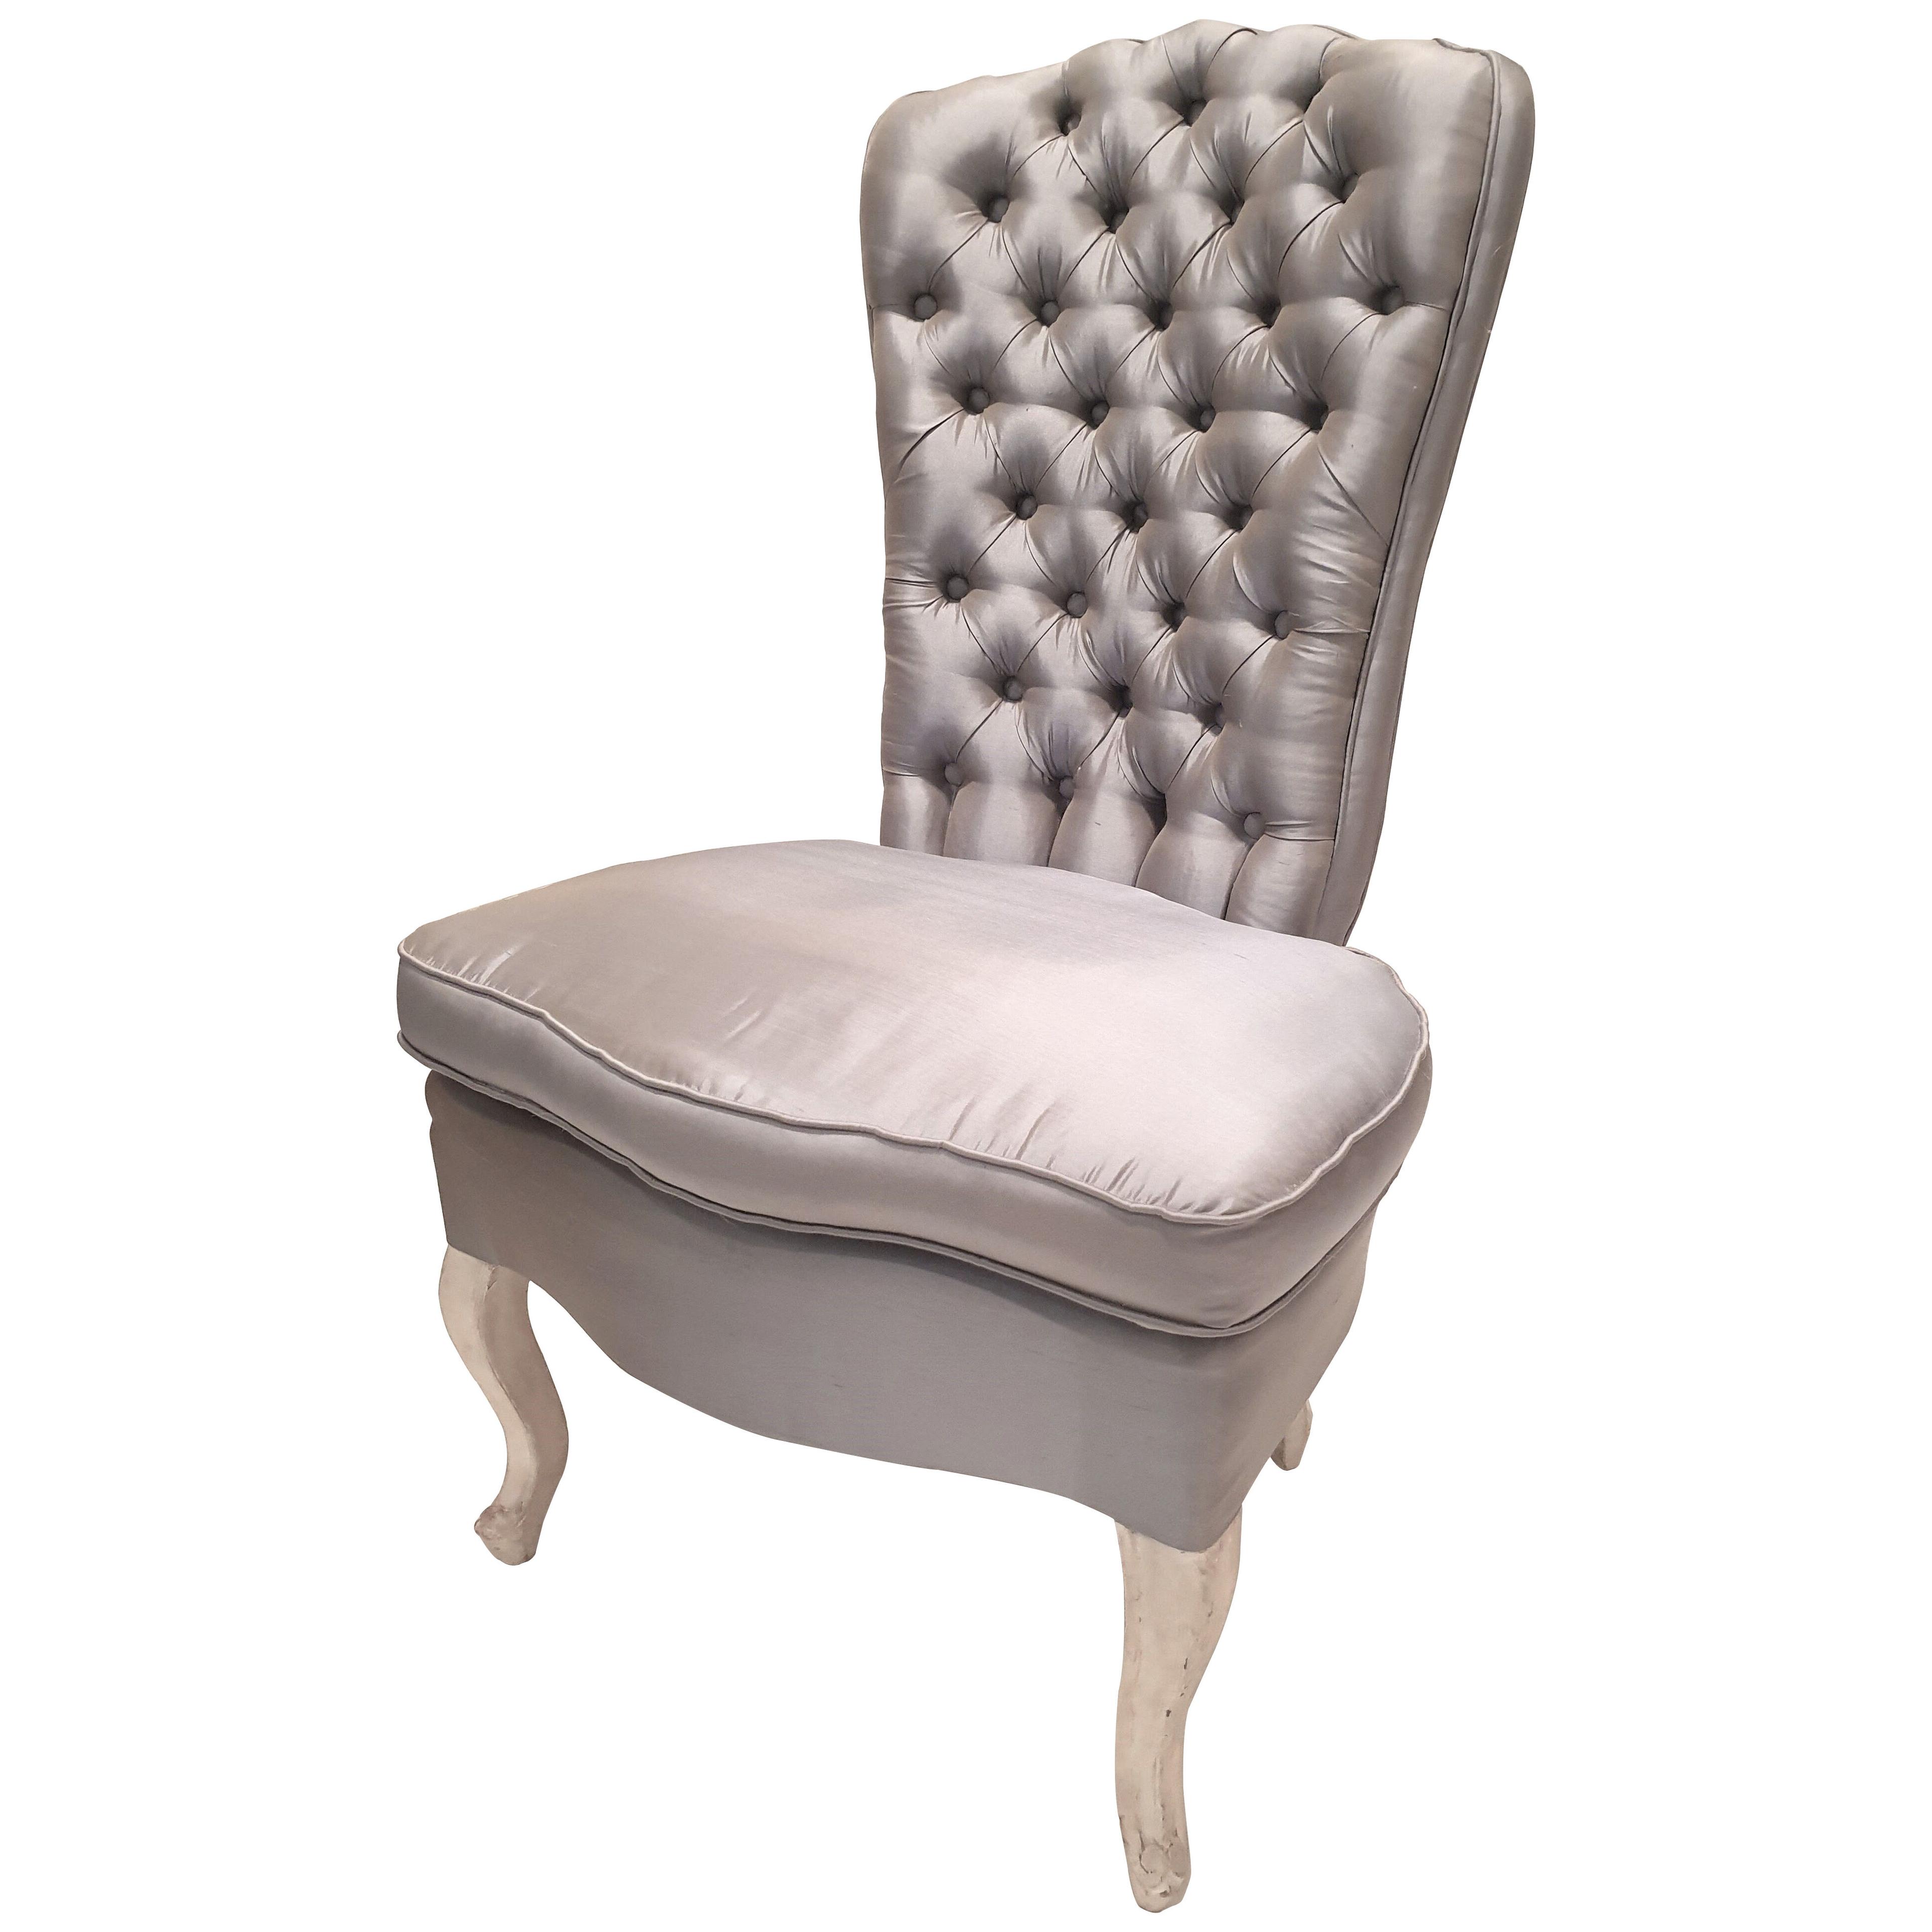 Shabby chic bedroom chair upholstered in silk.